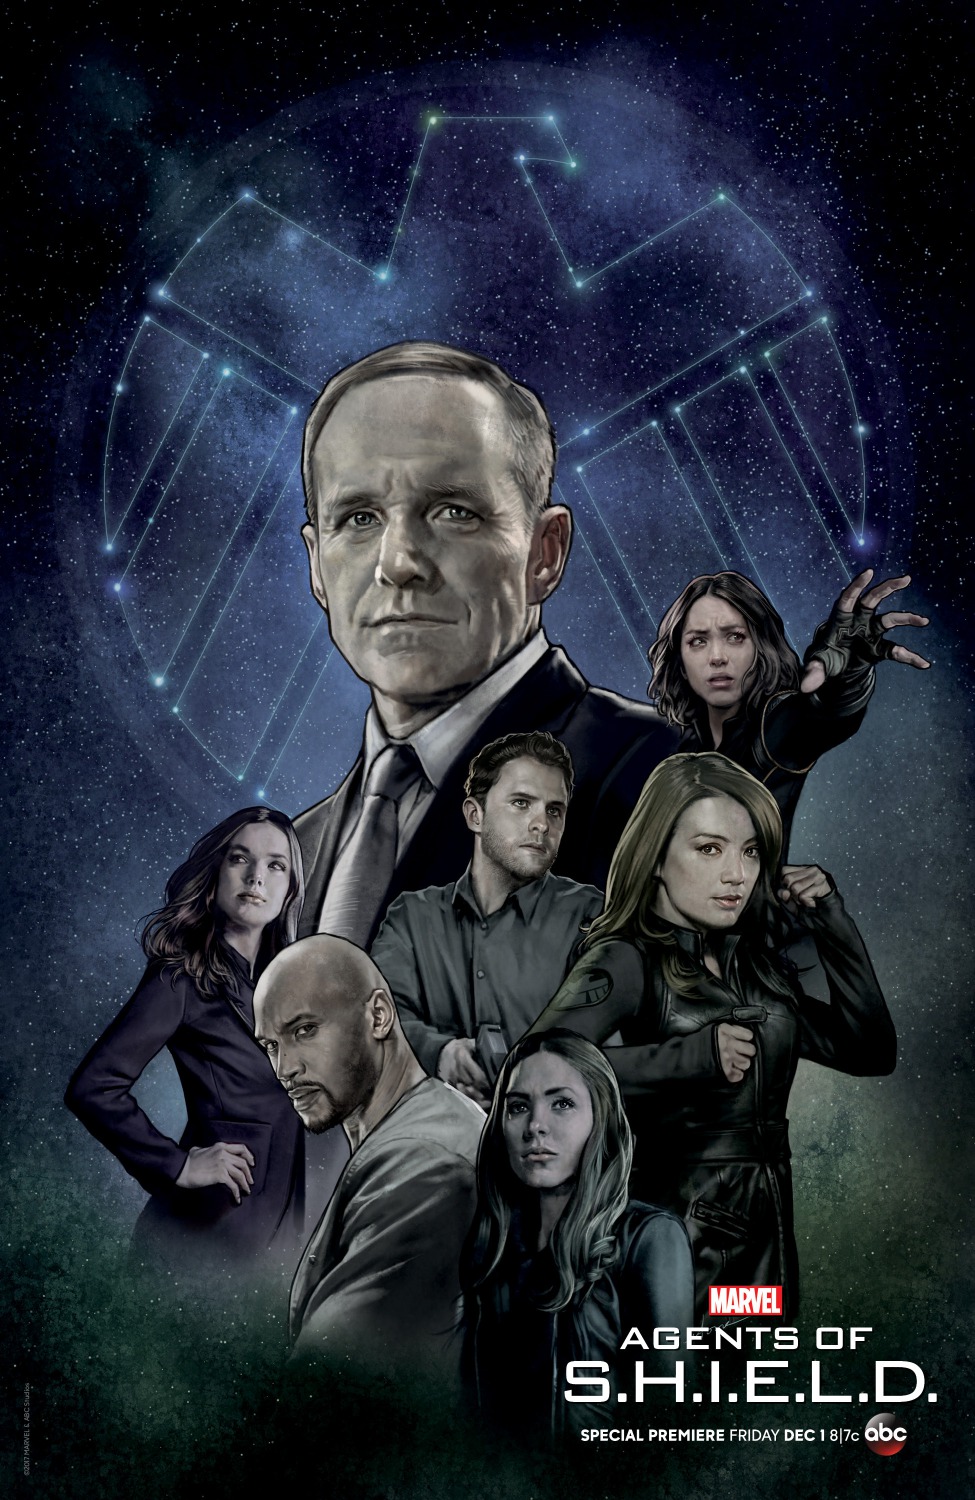 Extra Large TV Poster Image for Agents of S.H.I.E.L.D. (#17 of 27)